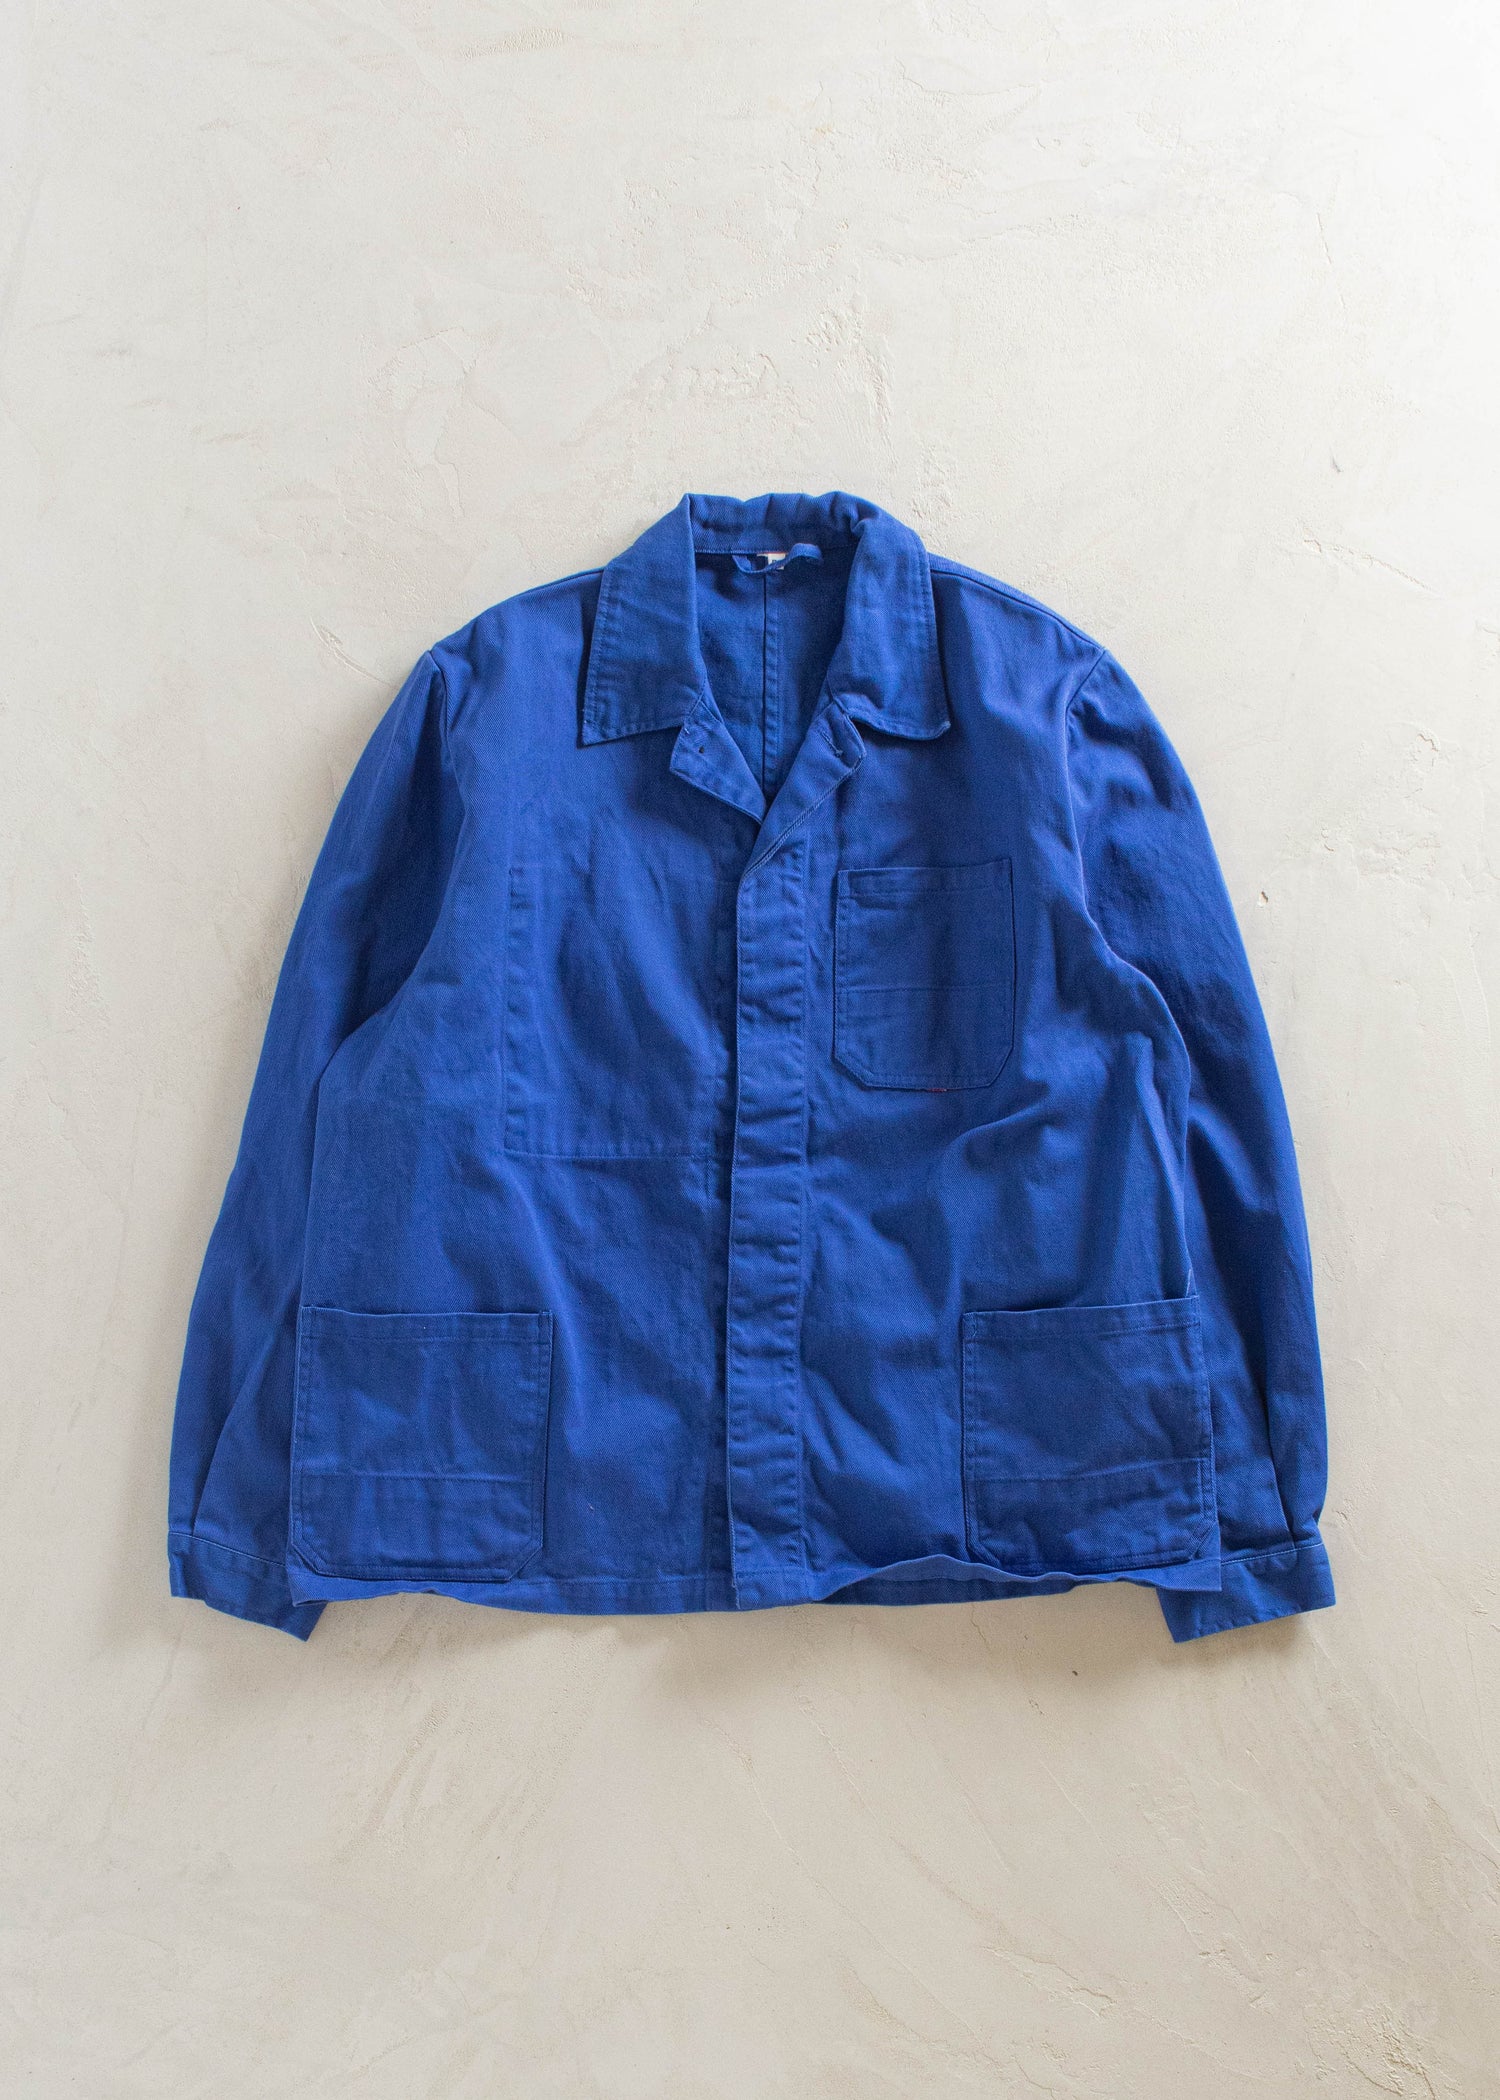 1980s French Workwear Chore Jacket Size M/L – Palmo Goods